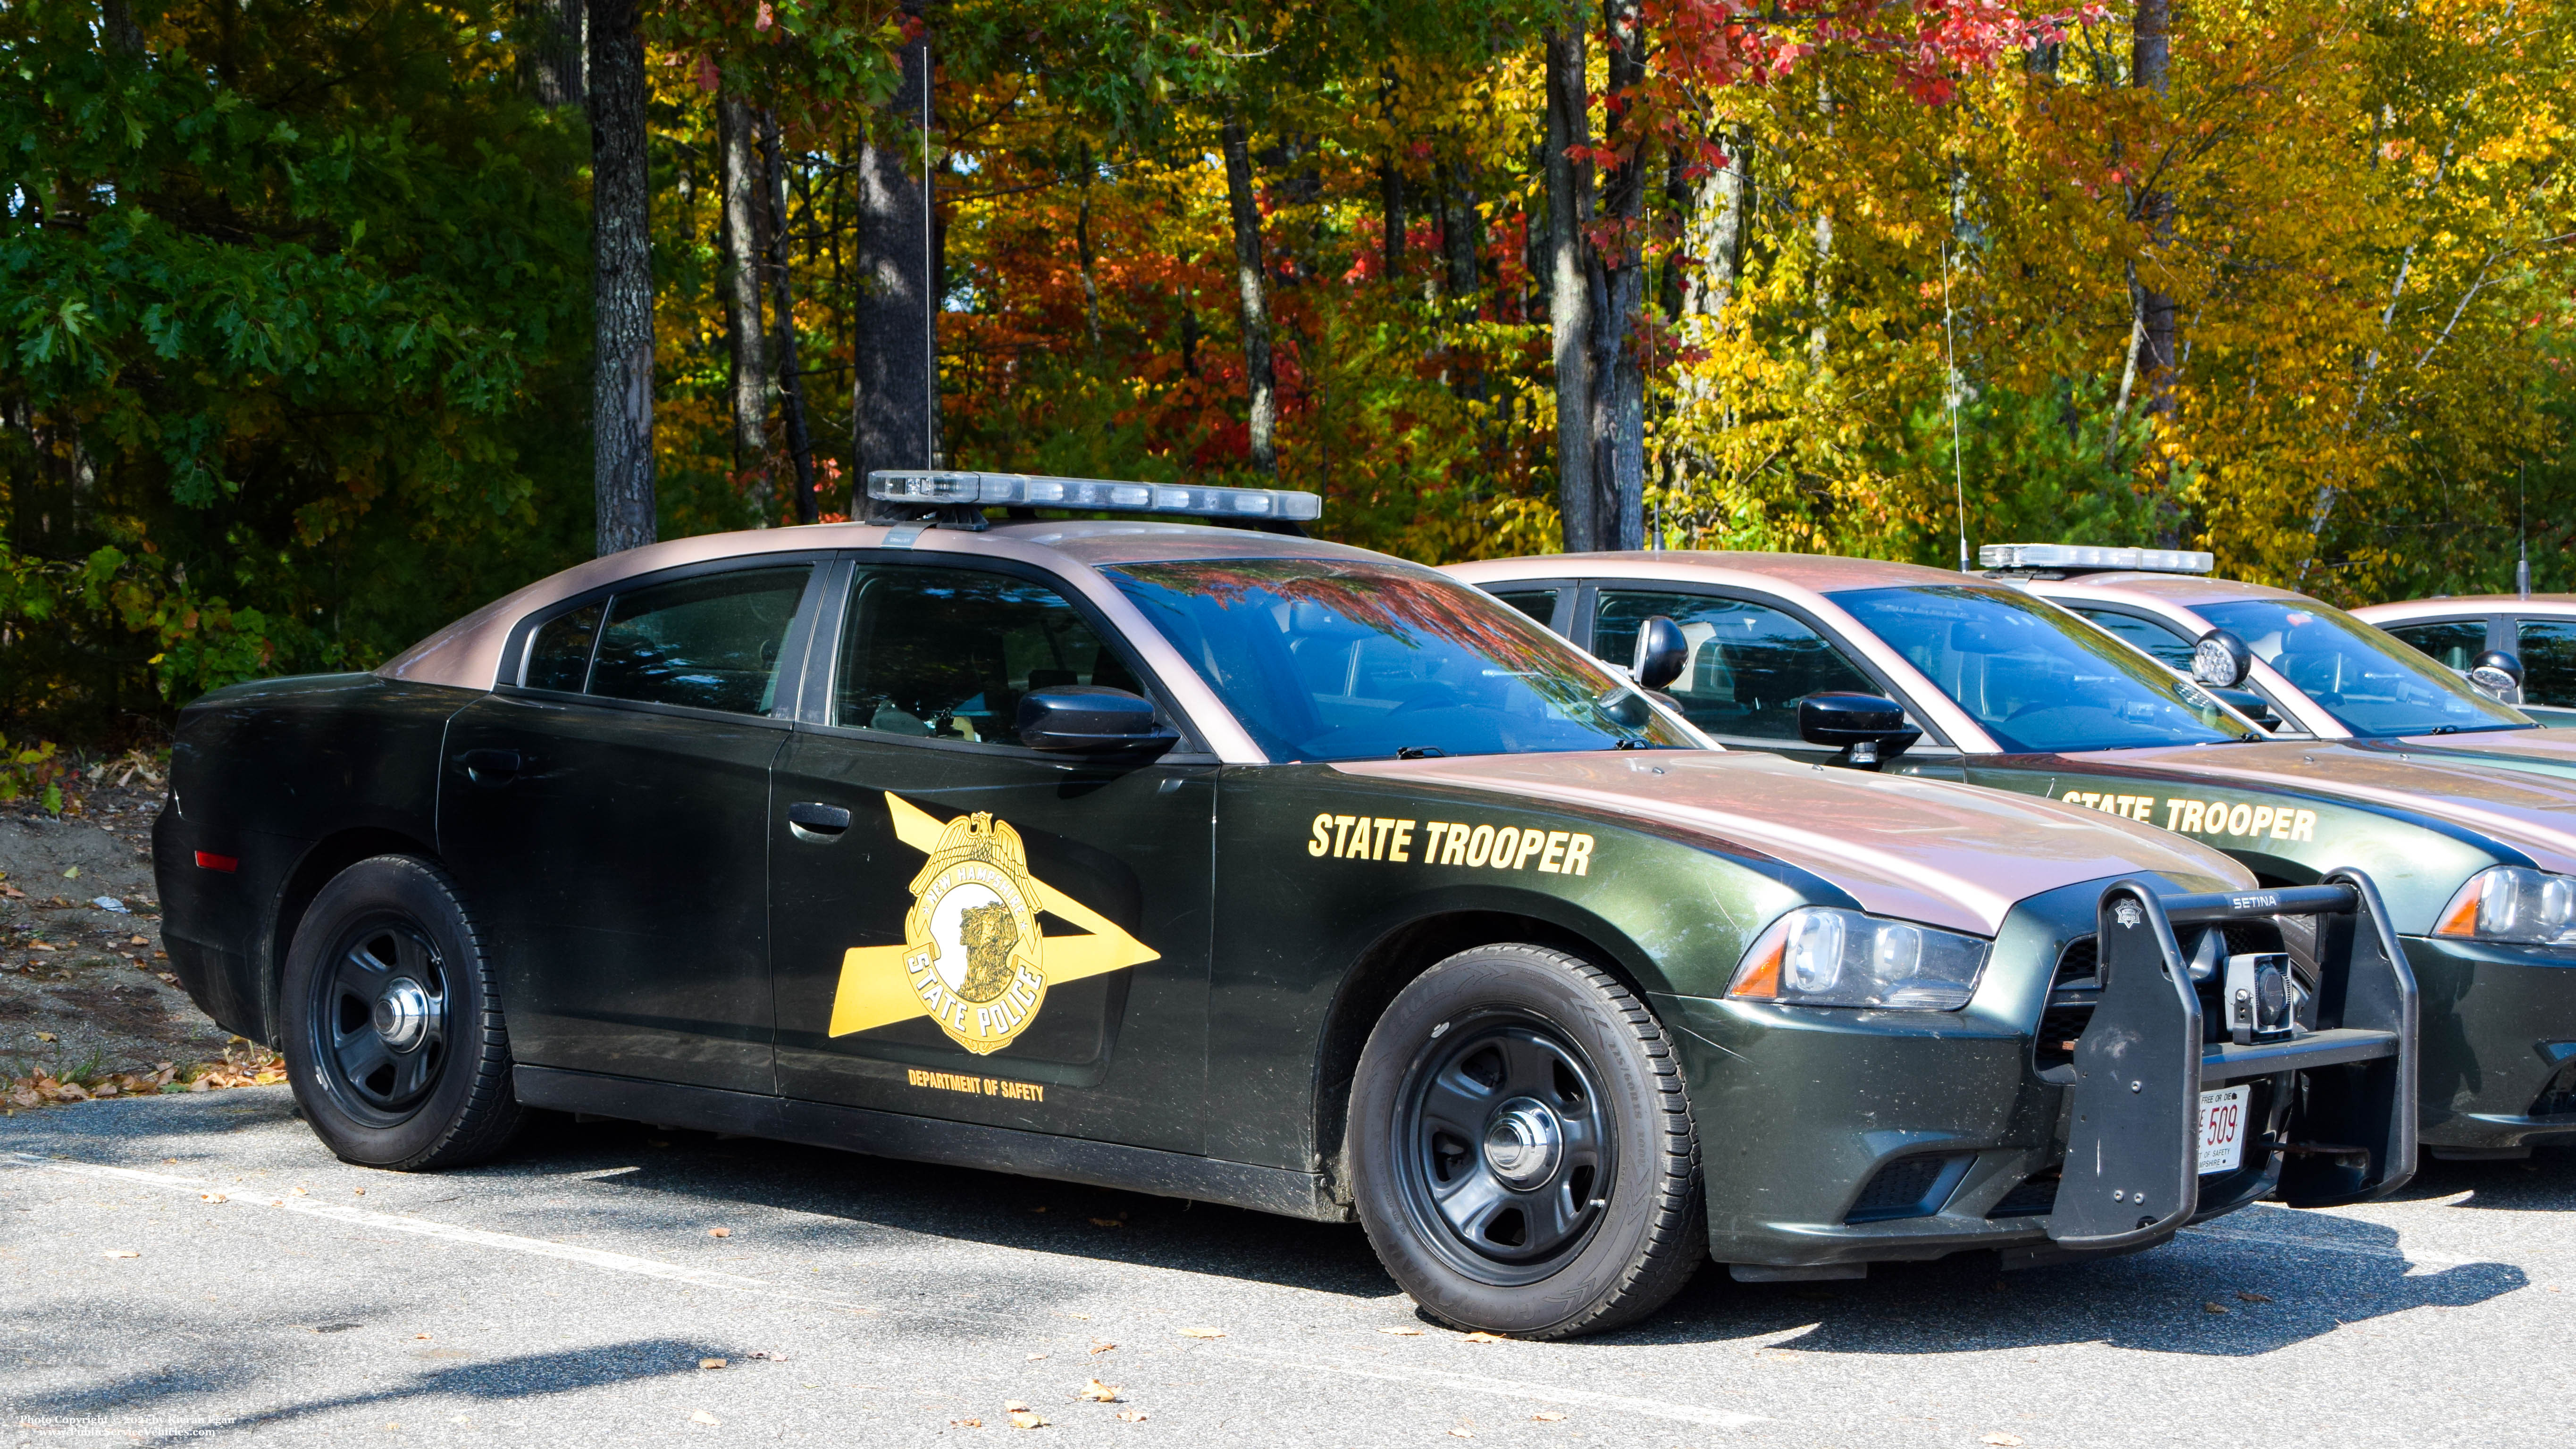 A photo  of New Hampshire State Police
            Cruiser 509, a 2011-2014 Dodge Charger             taken by Kieran Egan